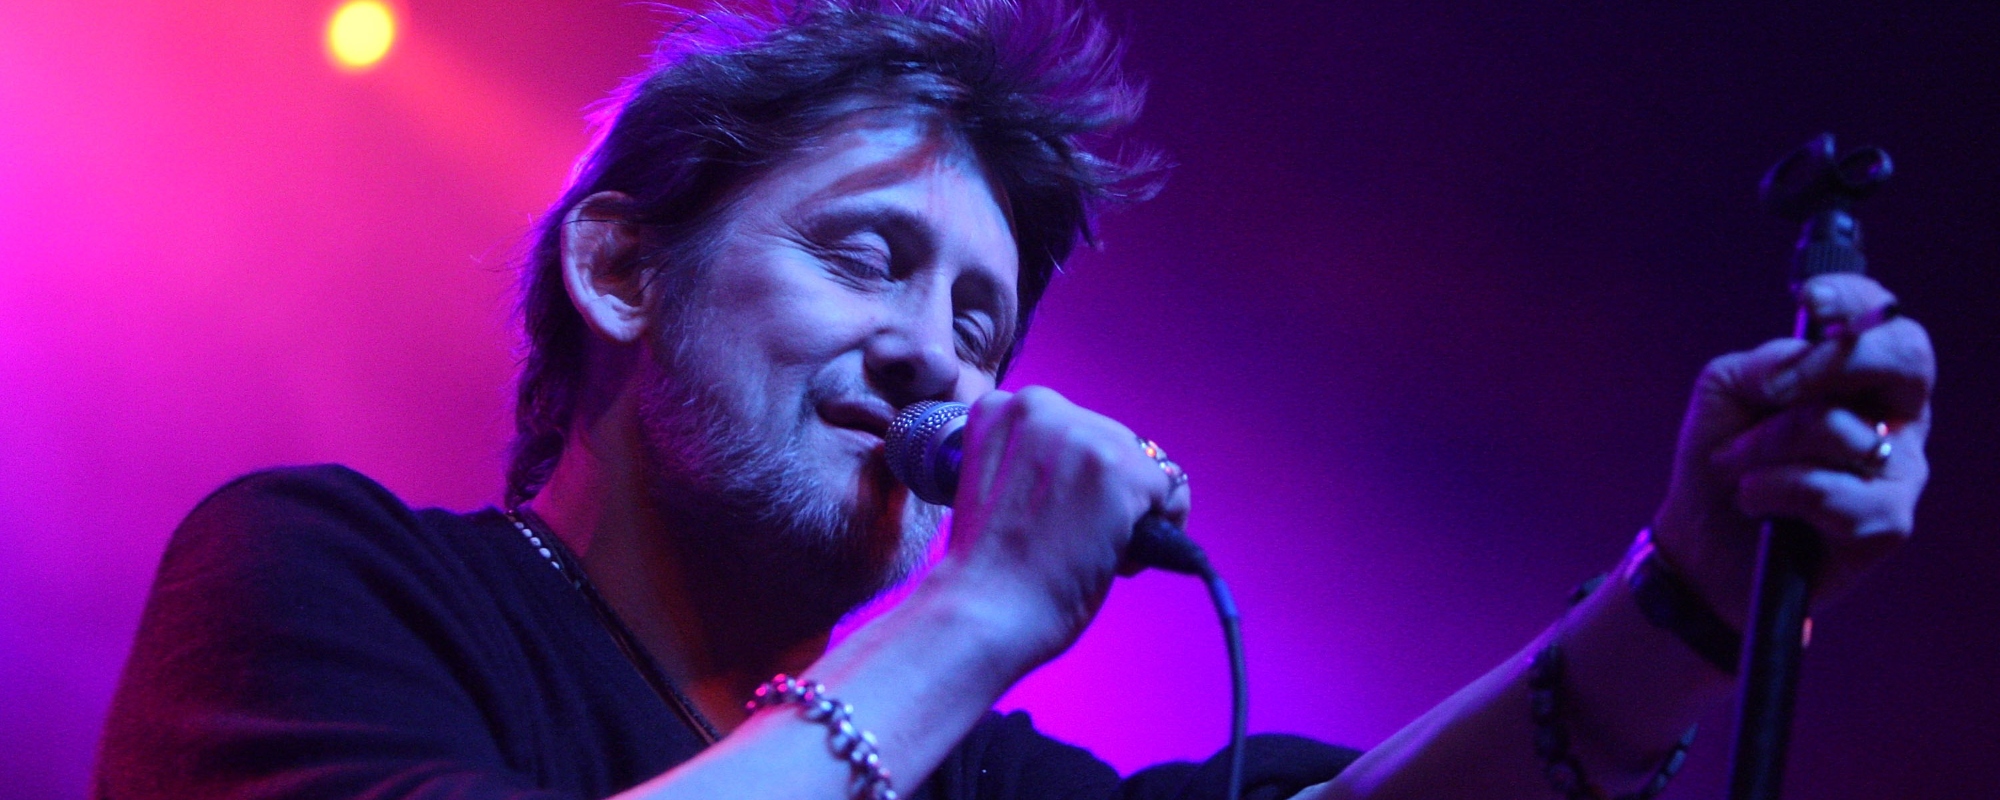 Shane MacGowan, Singer of the Influential Band The Pogues, Has Died at Age 65